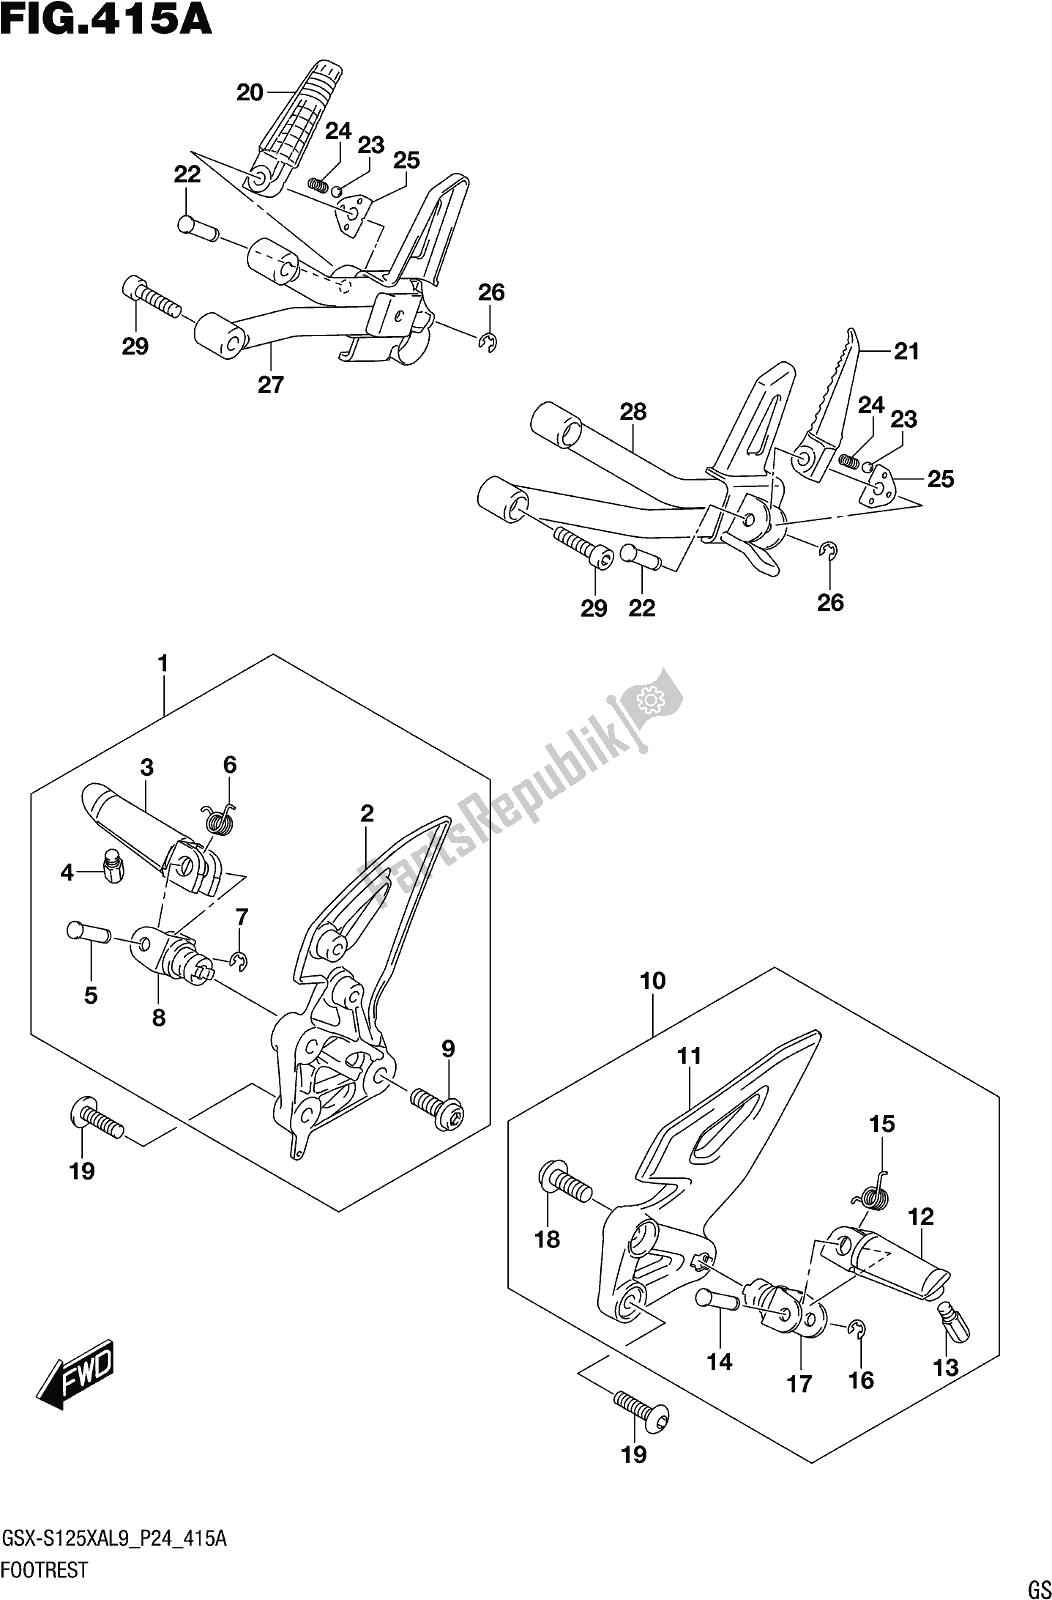 All parts for the Fig. 415a Footrest of the Suzuki Gsx-s 125 XA 2019